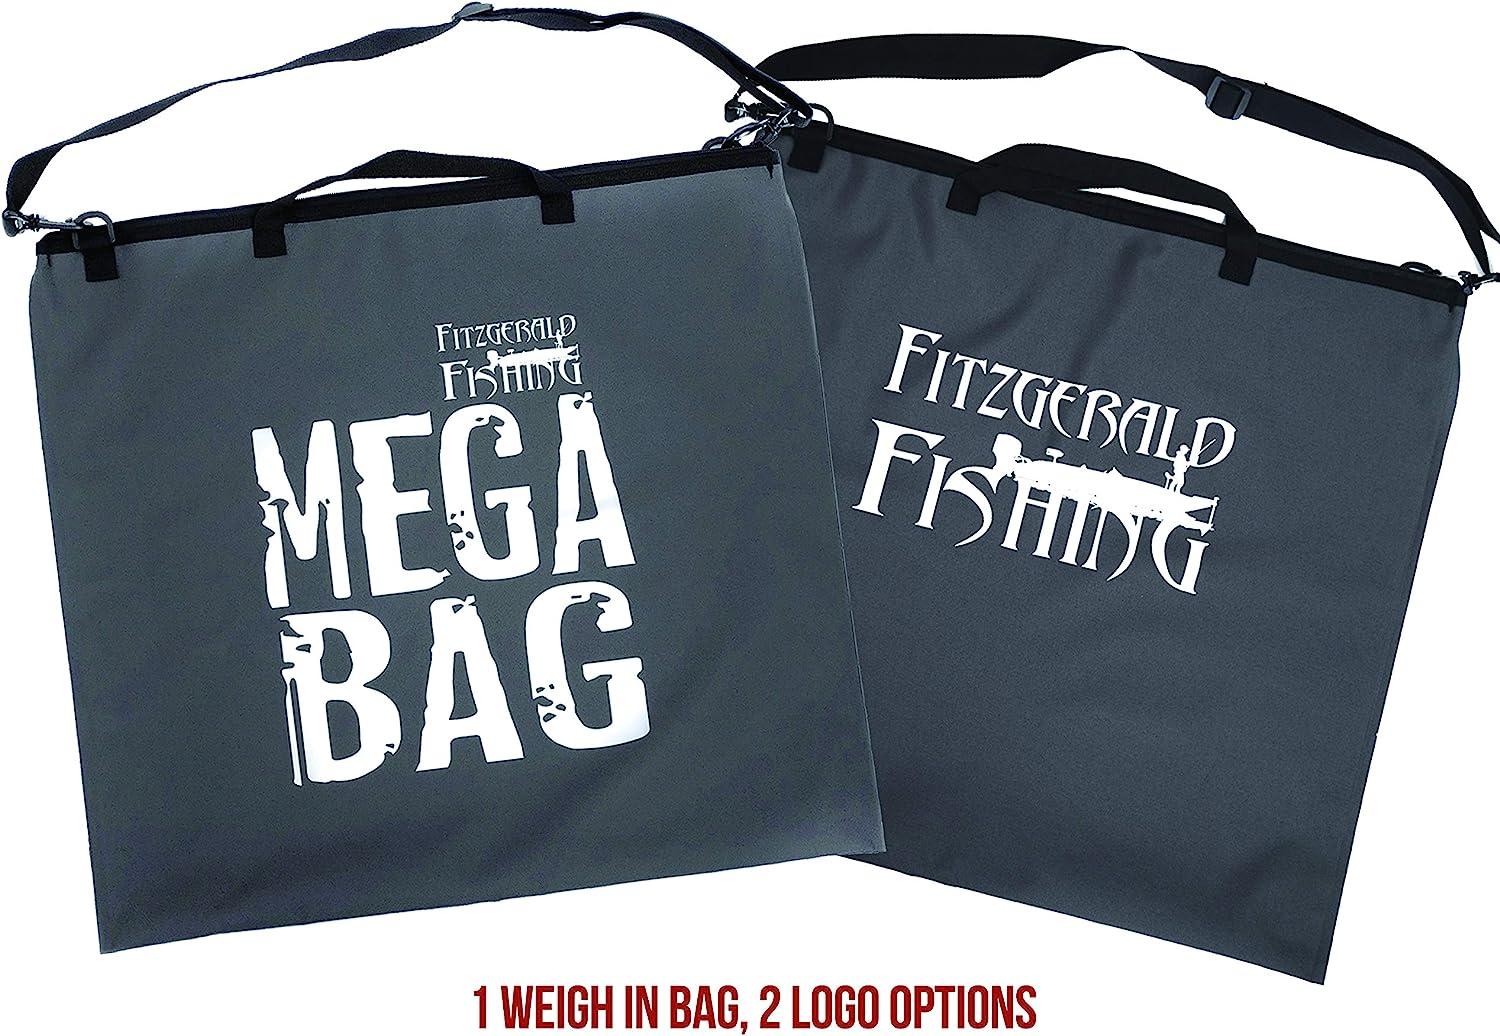 Fitzgerald Fishing Tournament Weigh in Fish Bag - Heavy Duty Fish Bags That  Transport Fish Safely, are Leak and Rip Resistant, Include Zipper Closure -  Mega Bag Logo